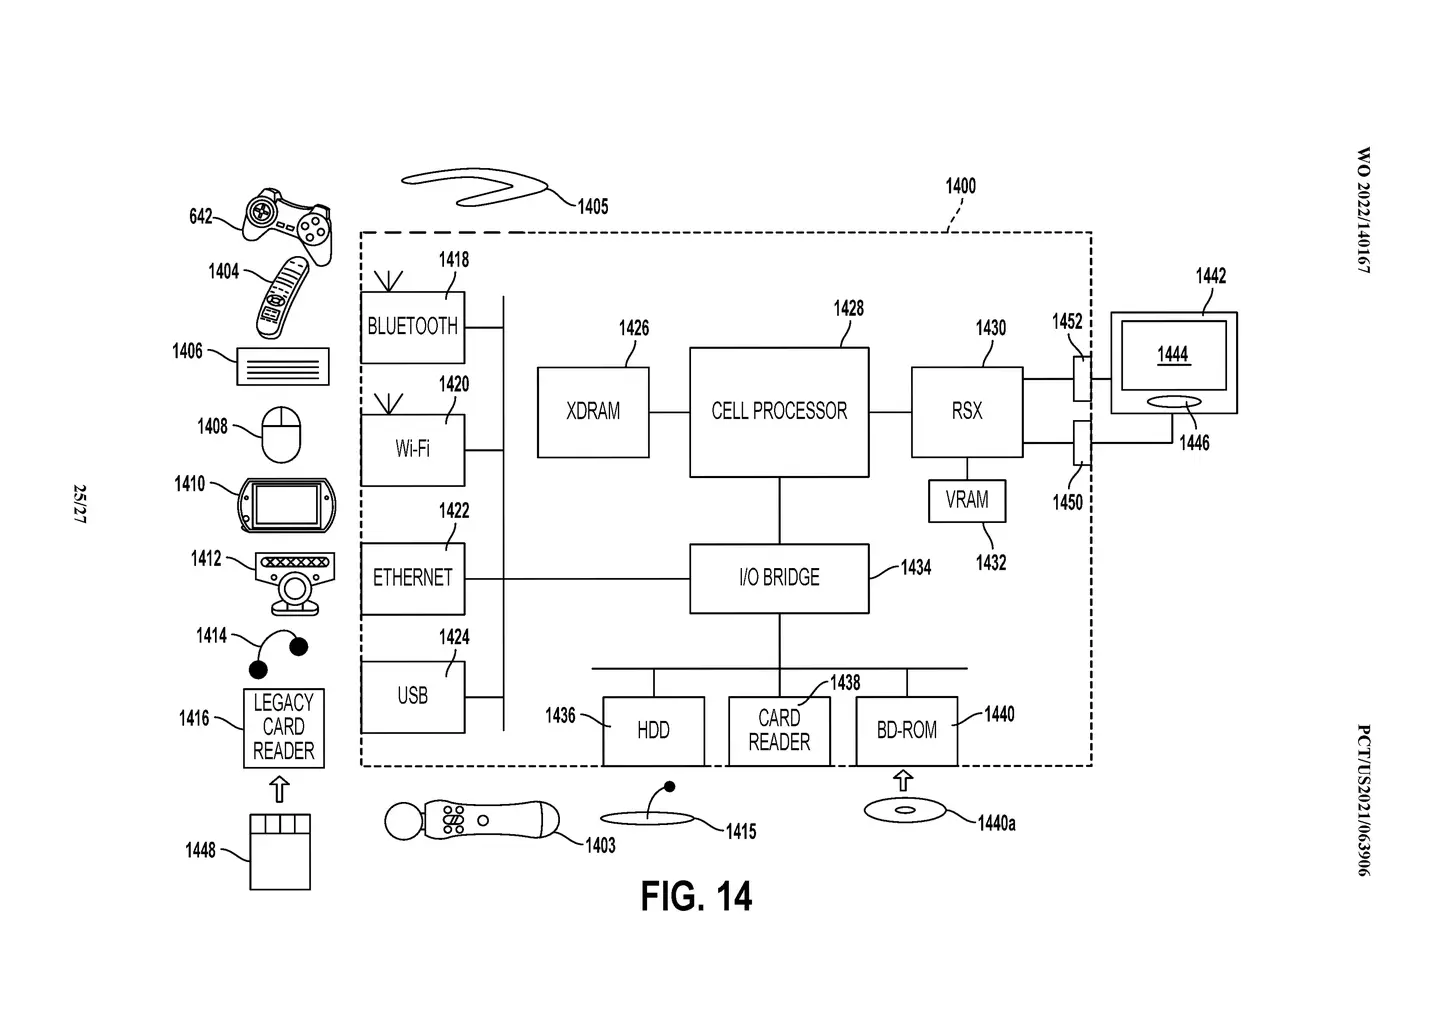 Sony's patent for emulation software including diagrams of peripherals /